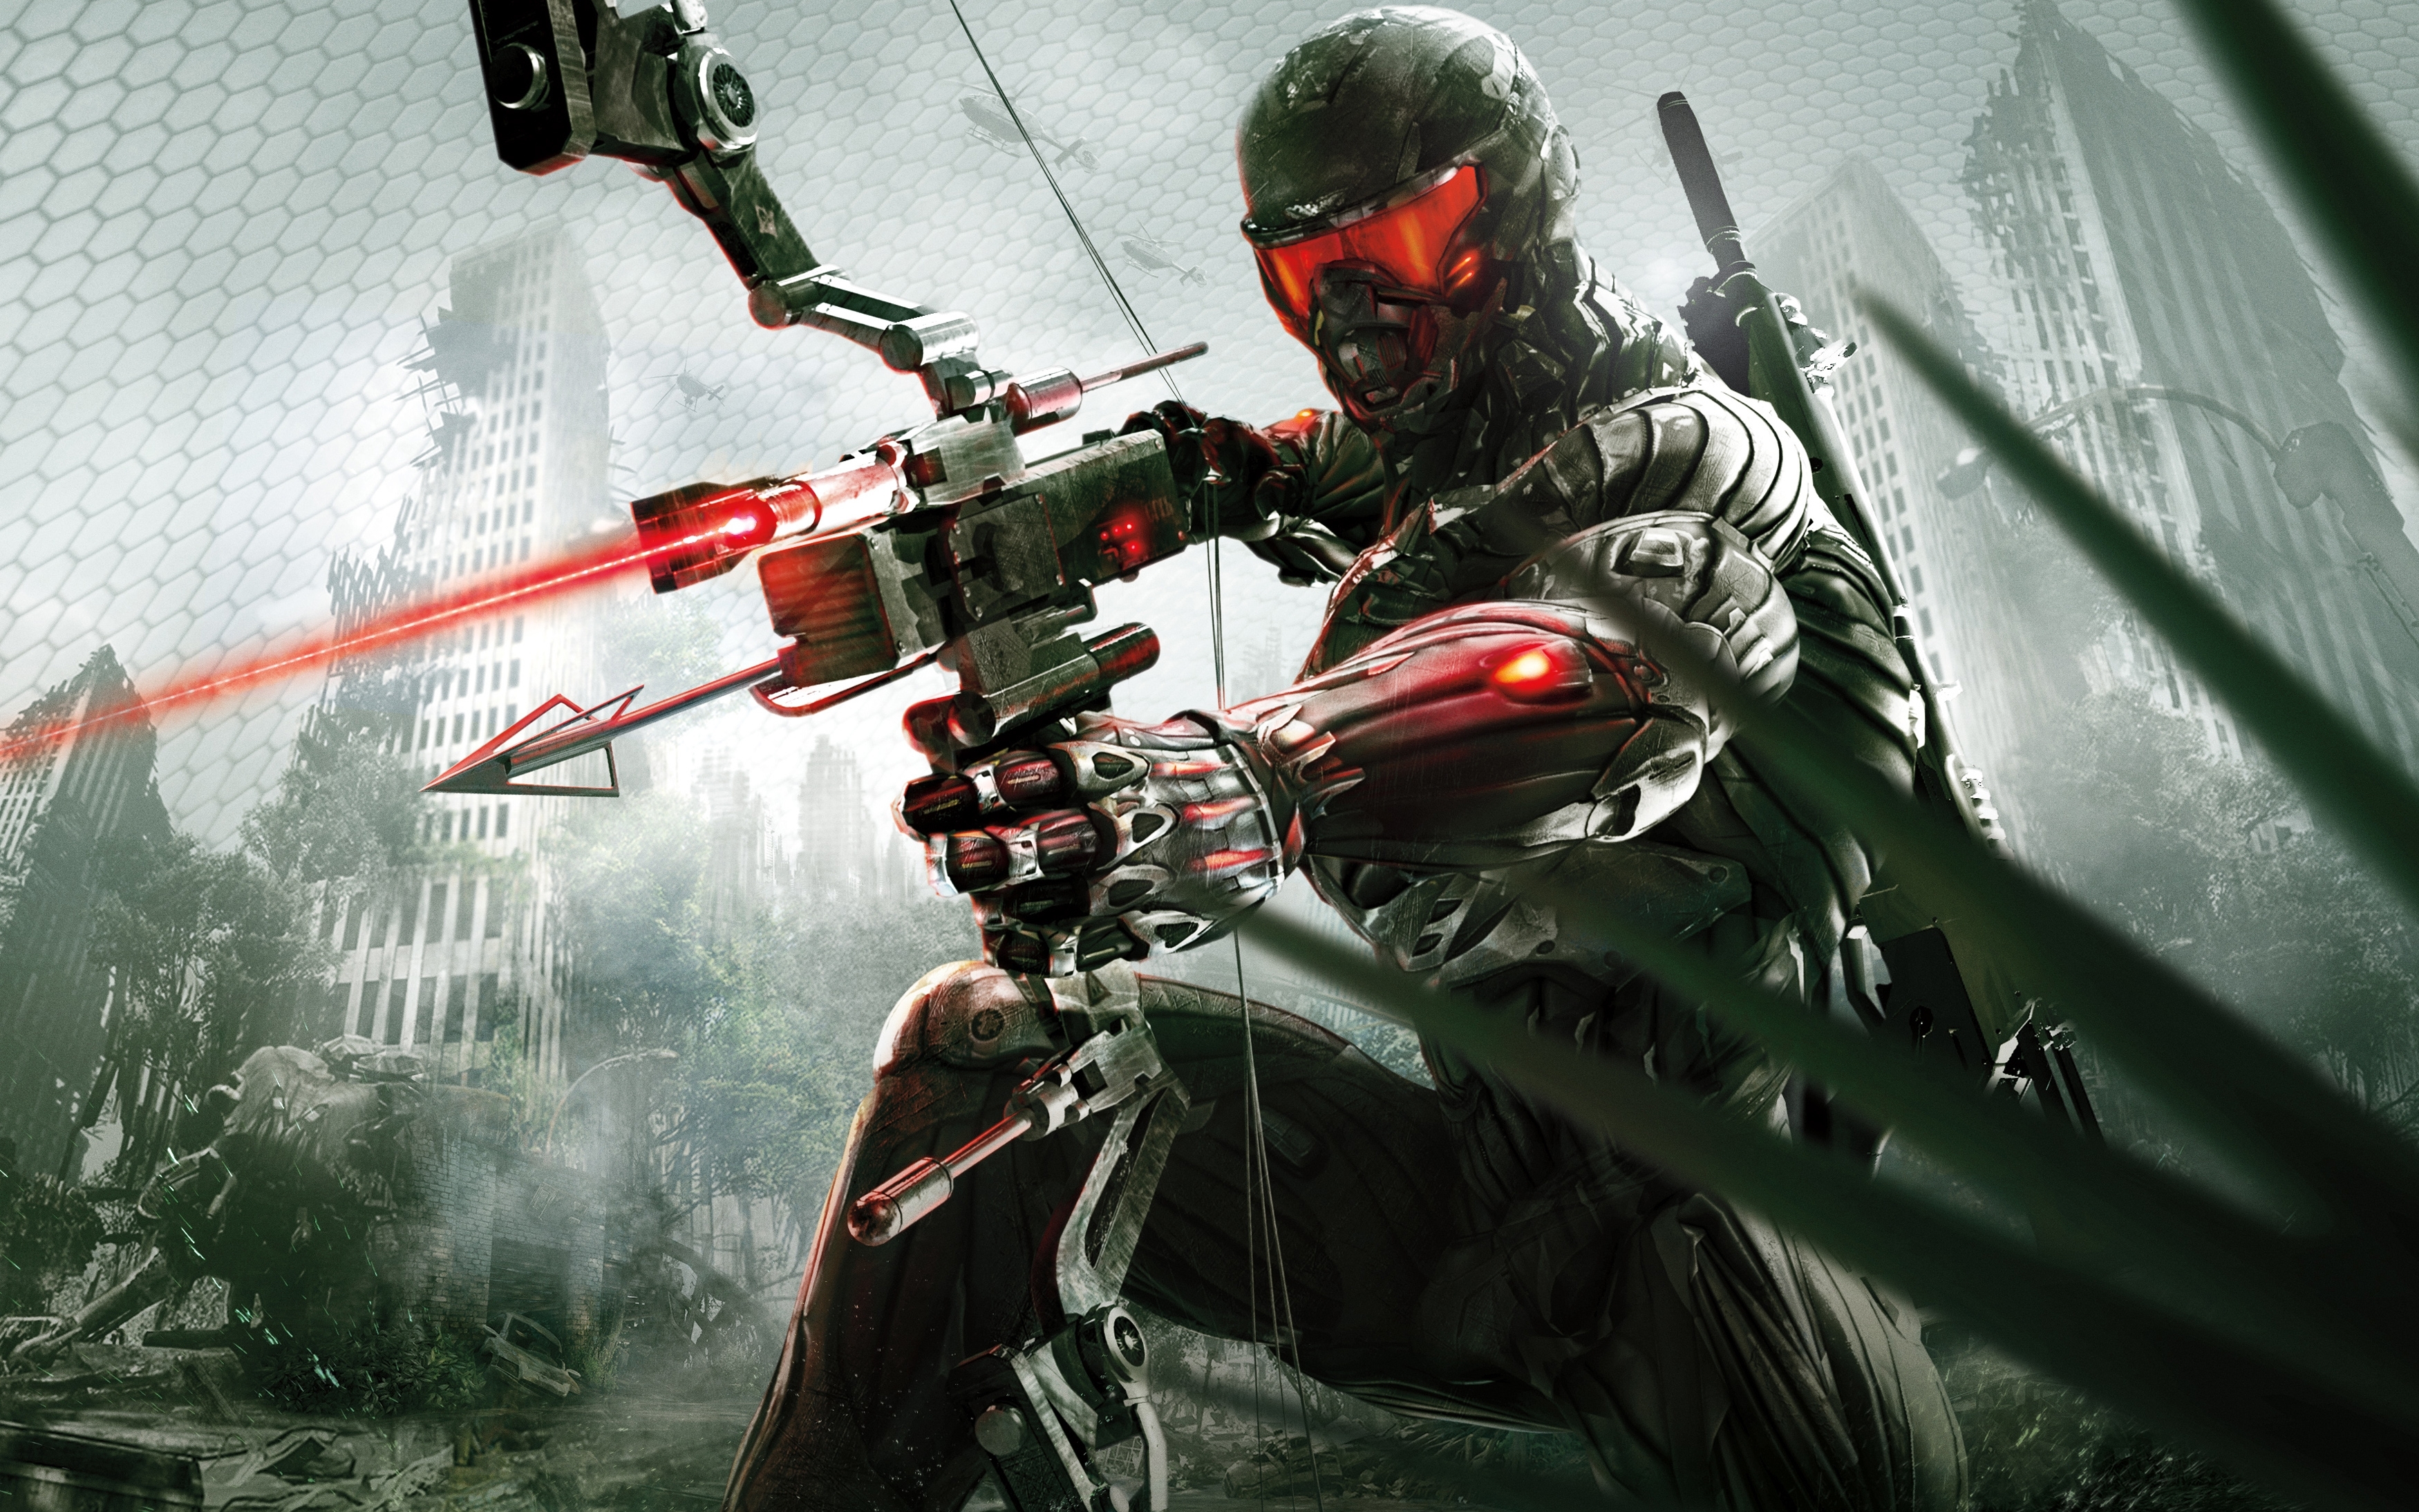 10 Best Crysis 3 Wallpaper Hd FULL HD 1080p For PC